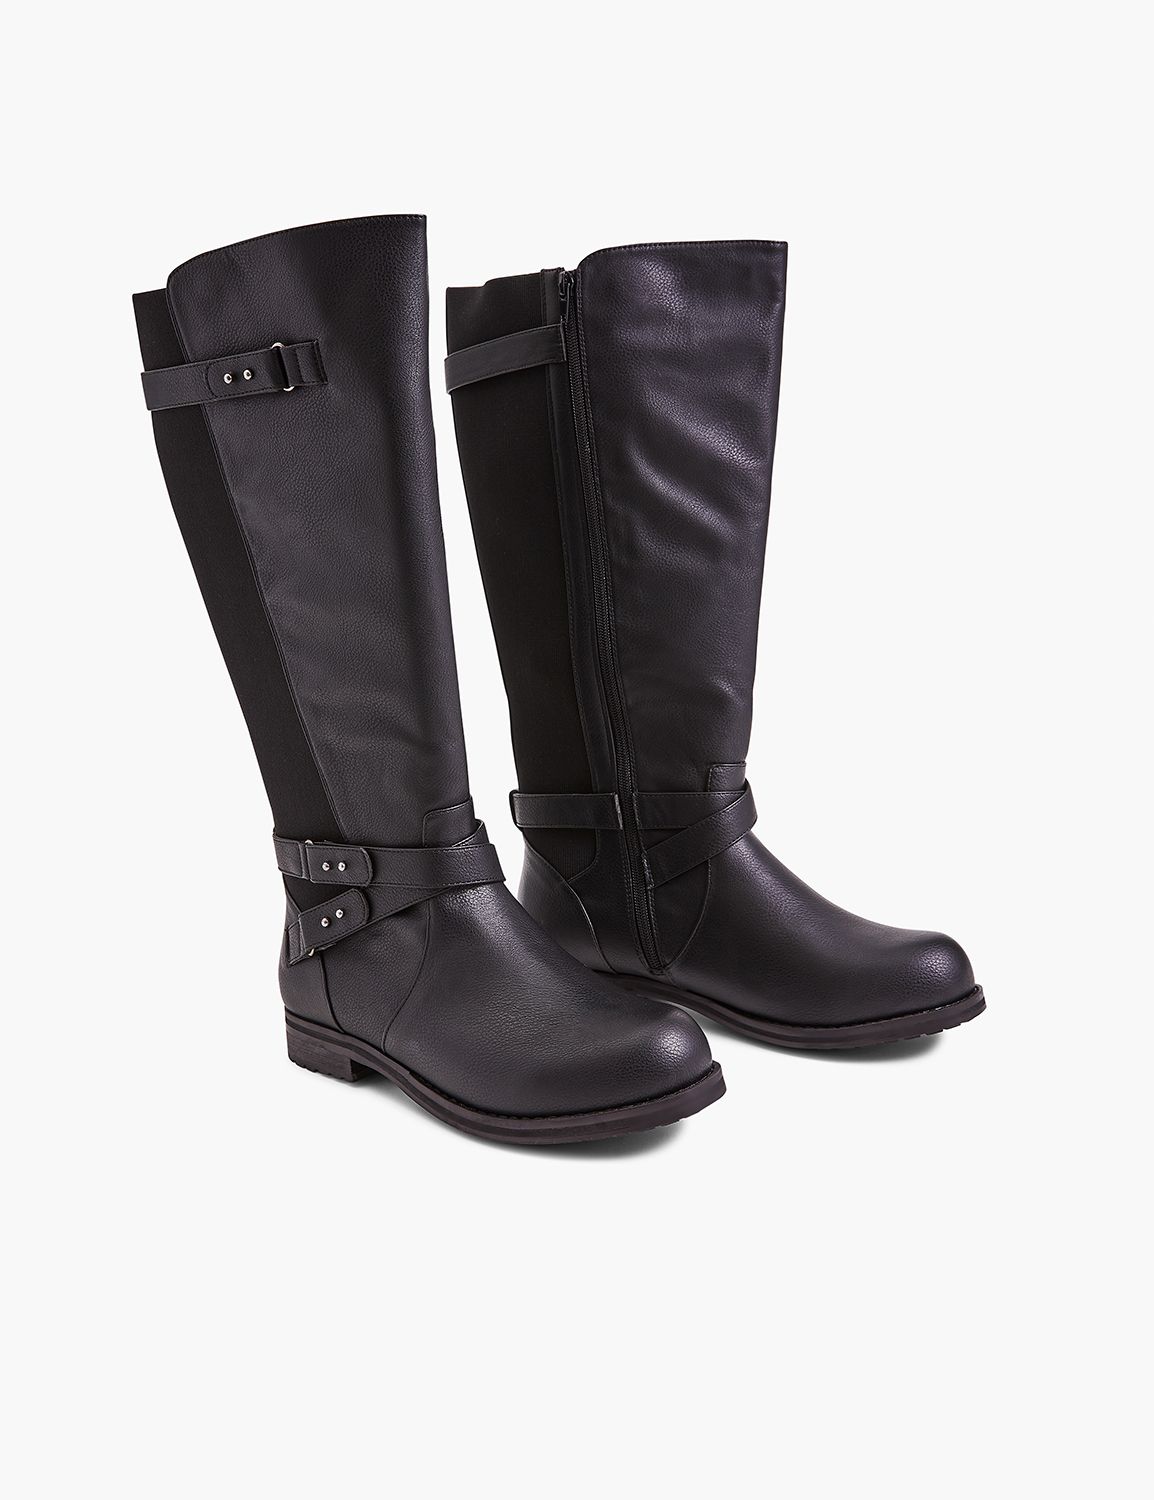 Lane Bryant Dream Cloud Riding Casual Tall Boot With Buckles 9EW Black